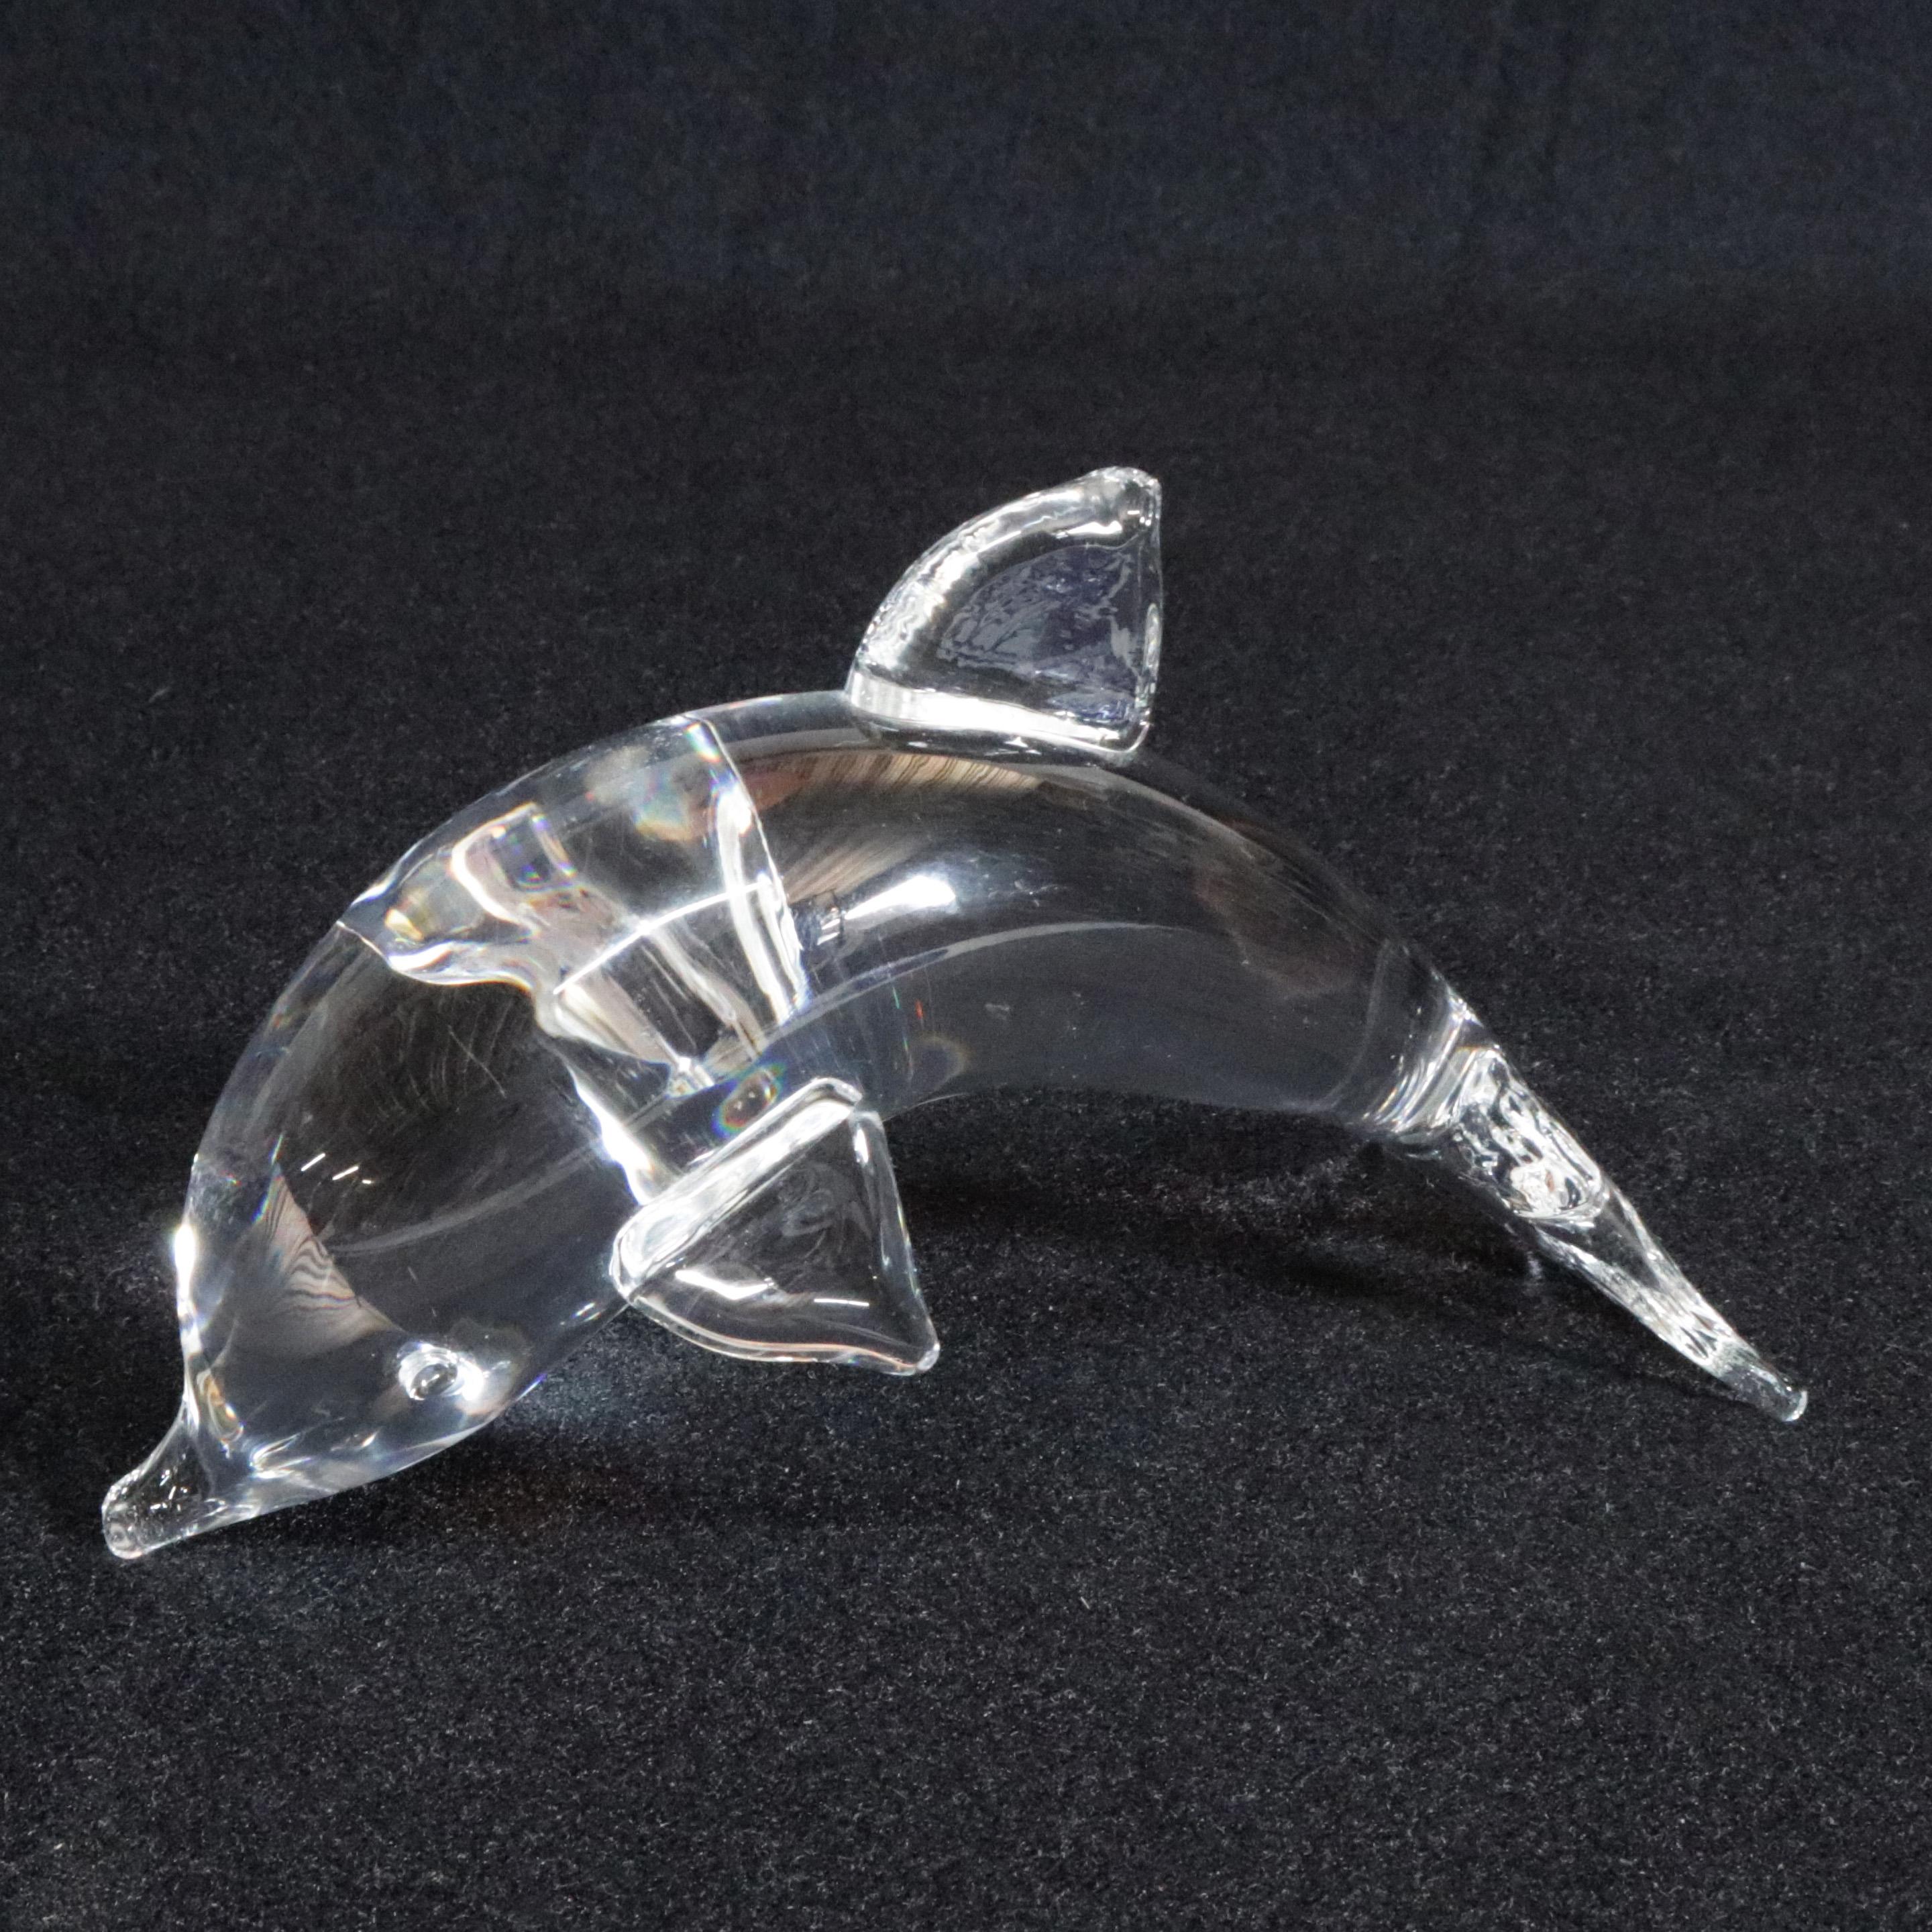 Pair of midcentury Steuben figurative mouth blown crystal sculptural paperweights of features colorless art glass in full body form of dolphins (porpoise) designed by Lloyd Atkins 1984 for Corning Museum of glass, New York, NY, signed on base, 20th